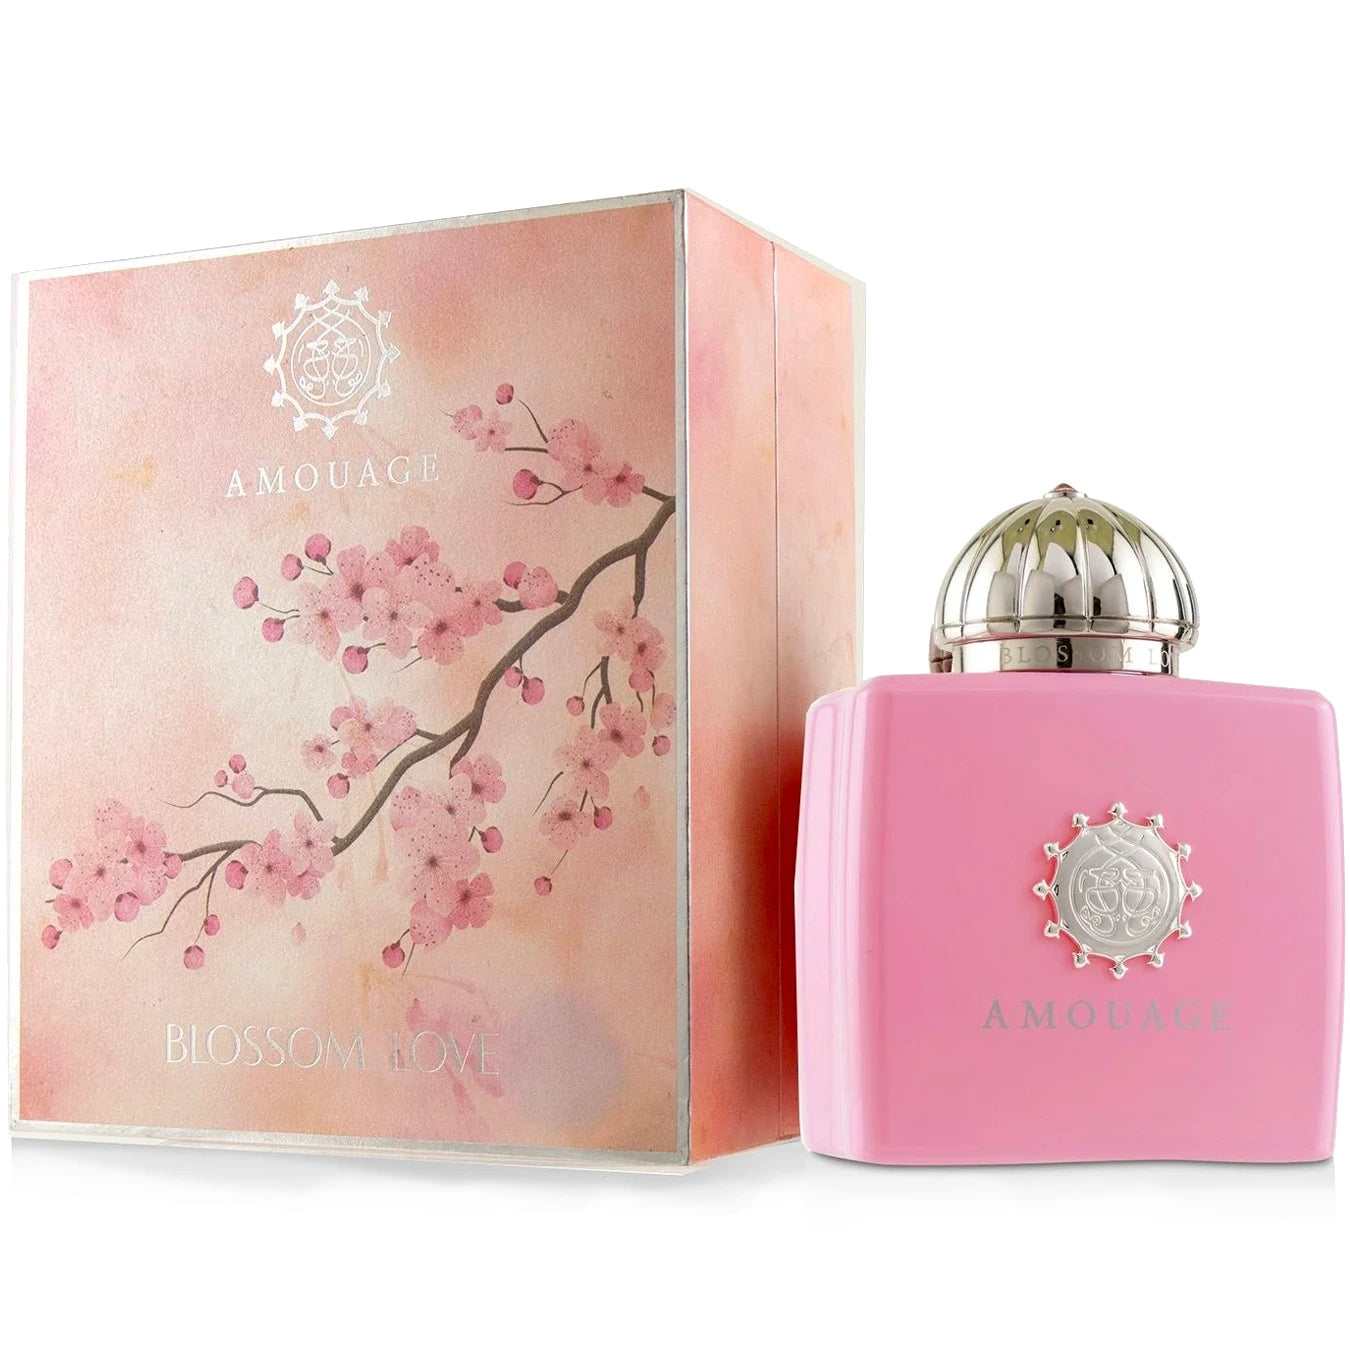 <p data-mce-fragment="1">Indulge in the delicate aroma of Amouage Blossom Love EDP. Offering a truly luxurious experience, this women's fragrance blends the seductive freshness of cherry blossoms with a rose liquor accord, alluring hints of almond, and a luxuriously creamy undercurrent. It's a floral experience that's perfect for any occasion.</p>
<ul data-mce-fragment="1">
<li data-mce-fragment="1">Top Notes: Cherry Blossom Nectar, Rose Liquor</li>
<li data-mce-fragment="1">Heart Notes: Ylang Ylang, Amaretto Accord, Vanilla</li>
<li data-mce-fragment="1">Base Notes: Tonka Bean, Sandalwood, Cashmeran</li>
</ul>